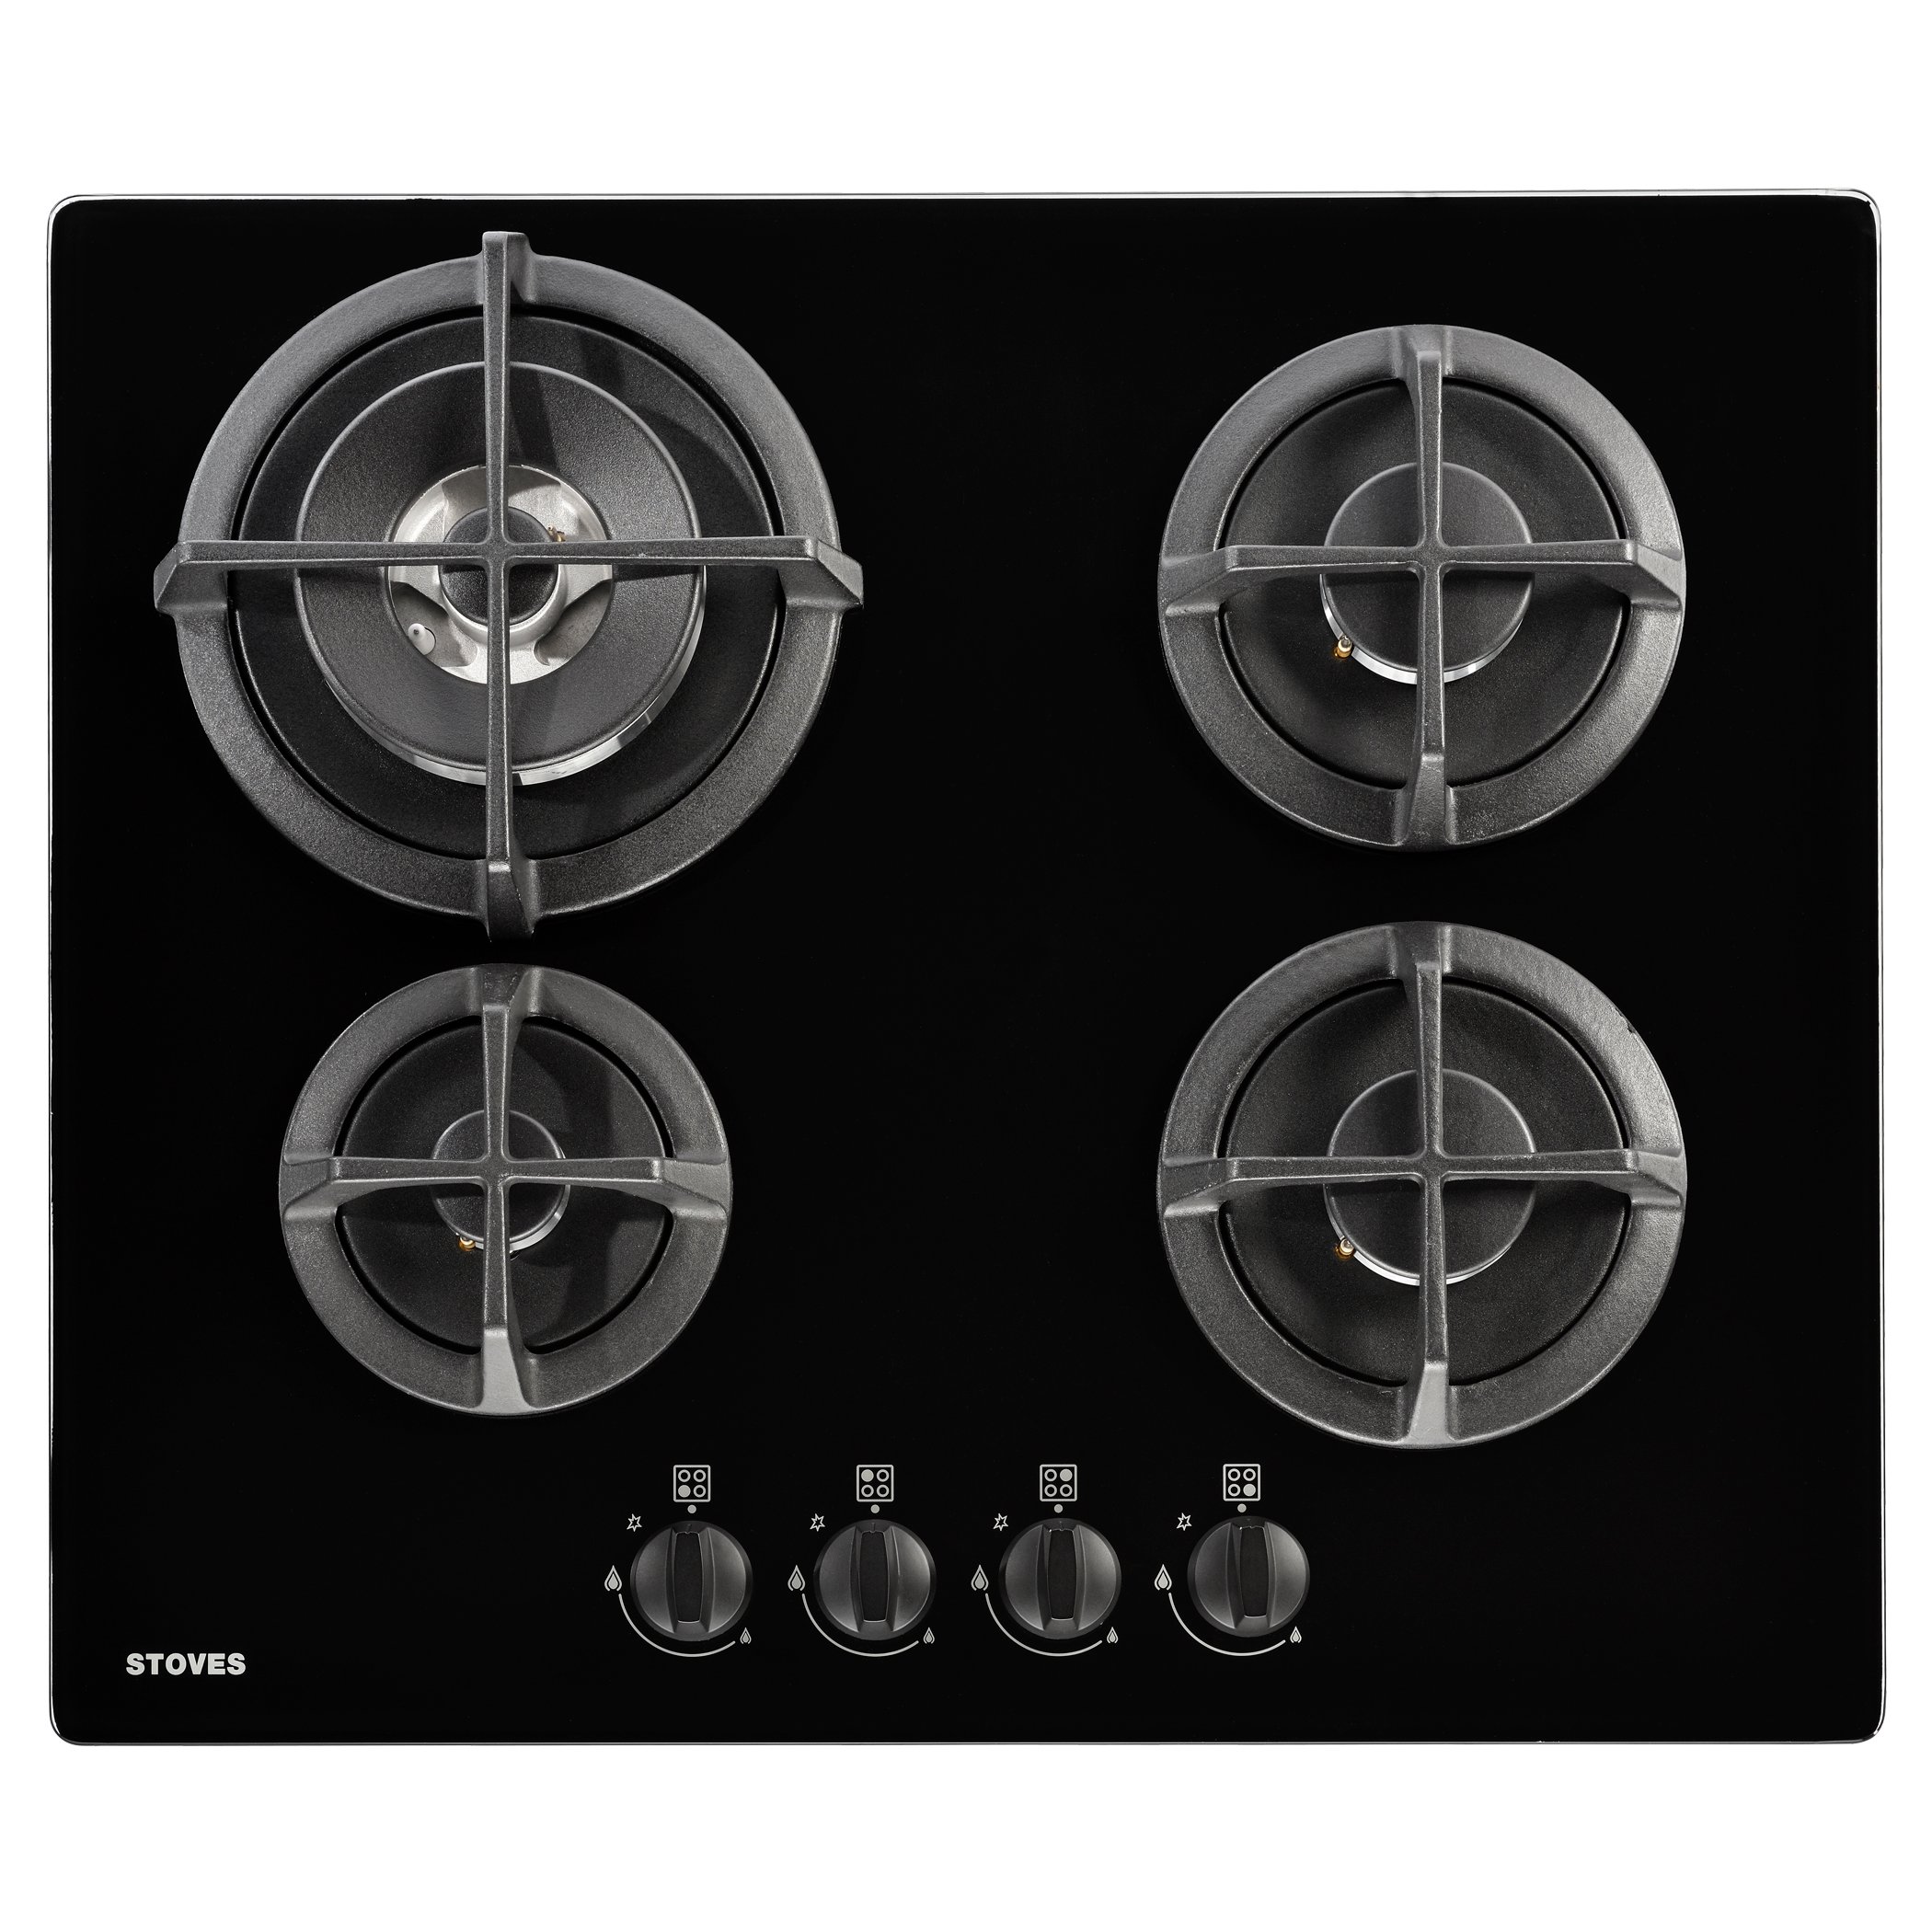 60cm built-in gas through glass hob offers 4 gas burners. Additional features include cast iron pan supports, automatic ignition, front rotary controls, flame safety device and easy clean surface.